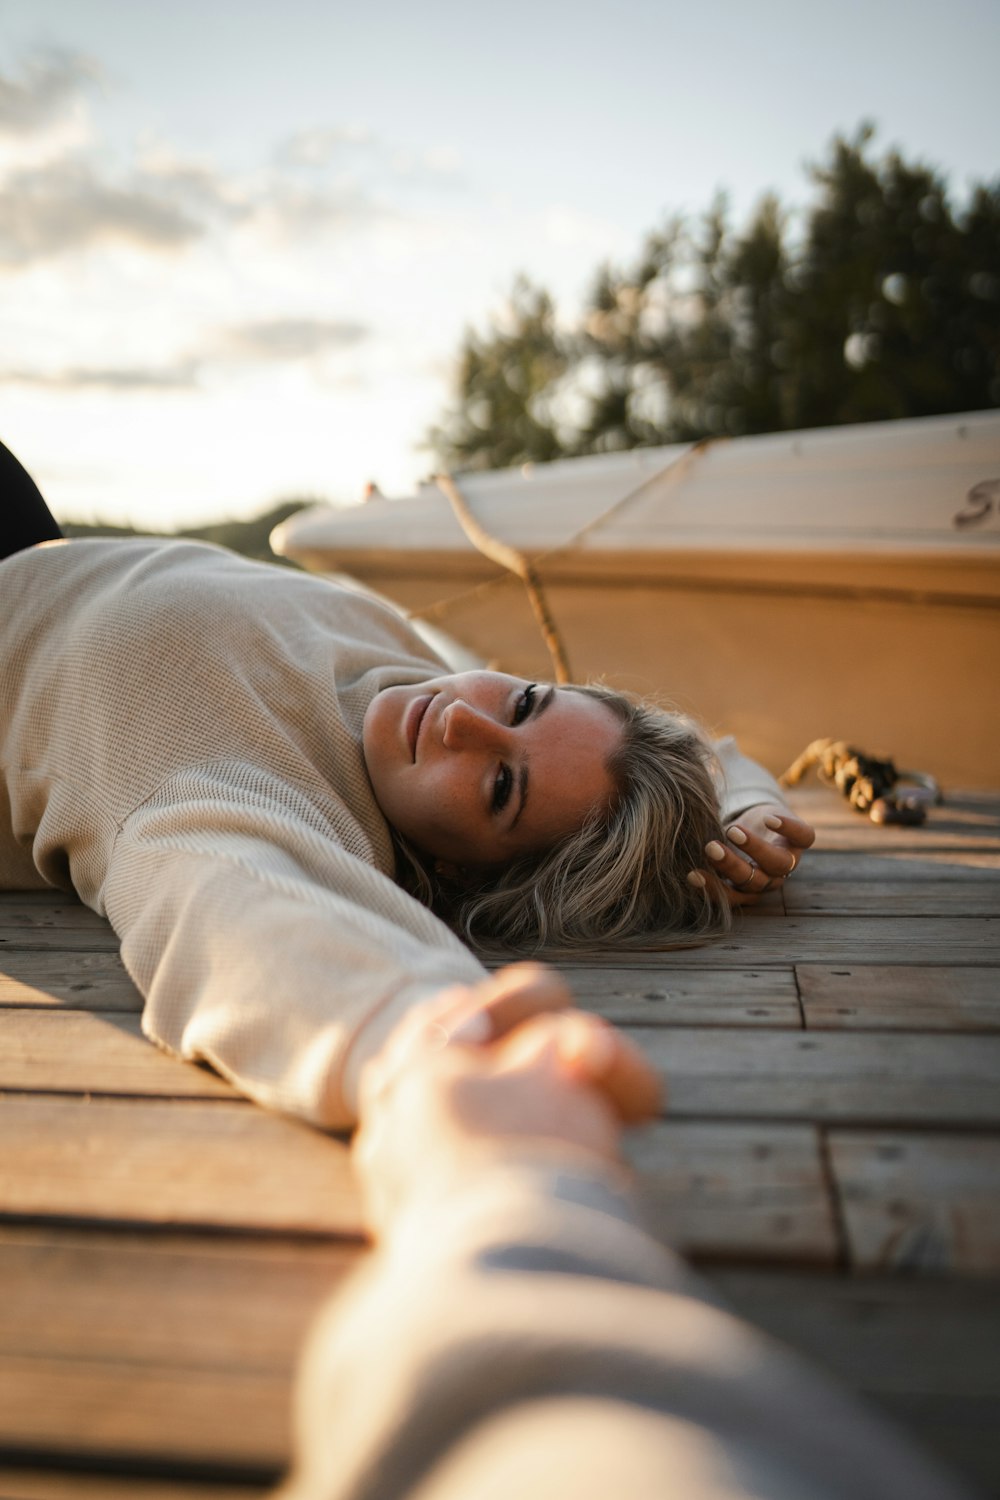 a person lying on a wooden deck